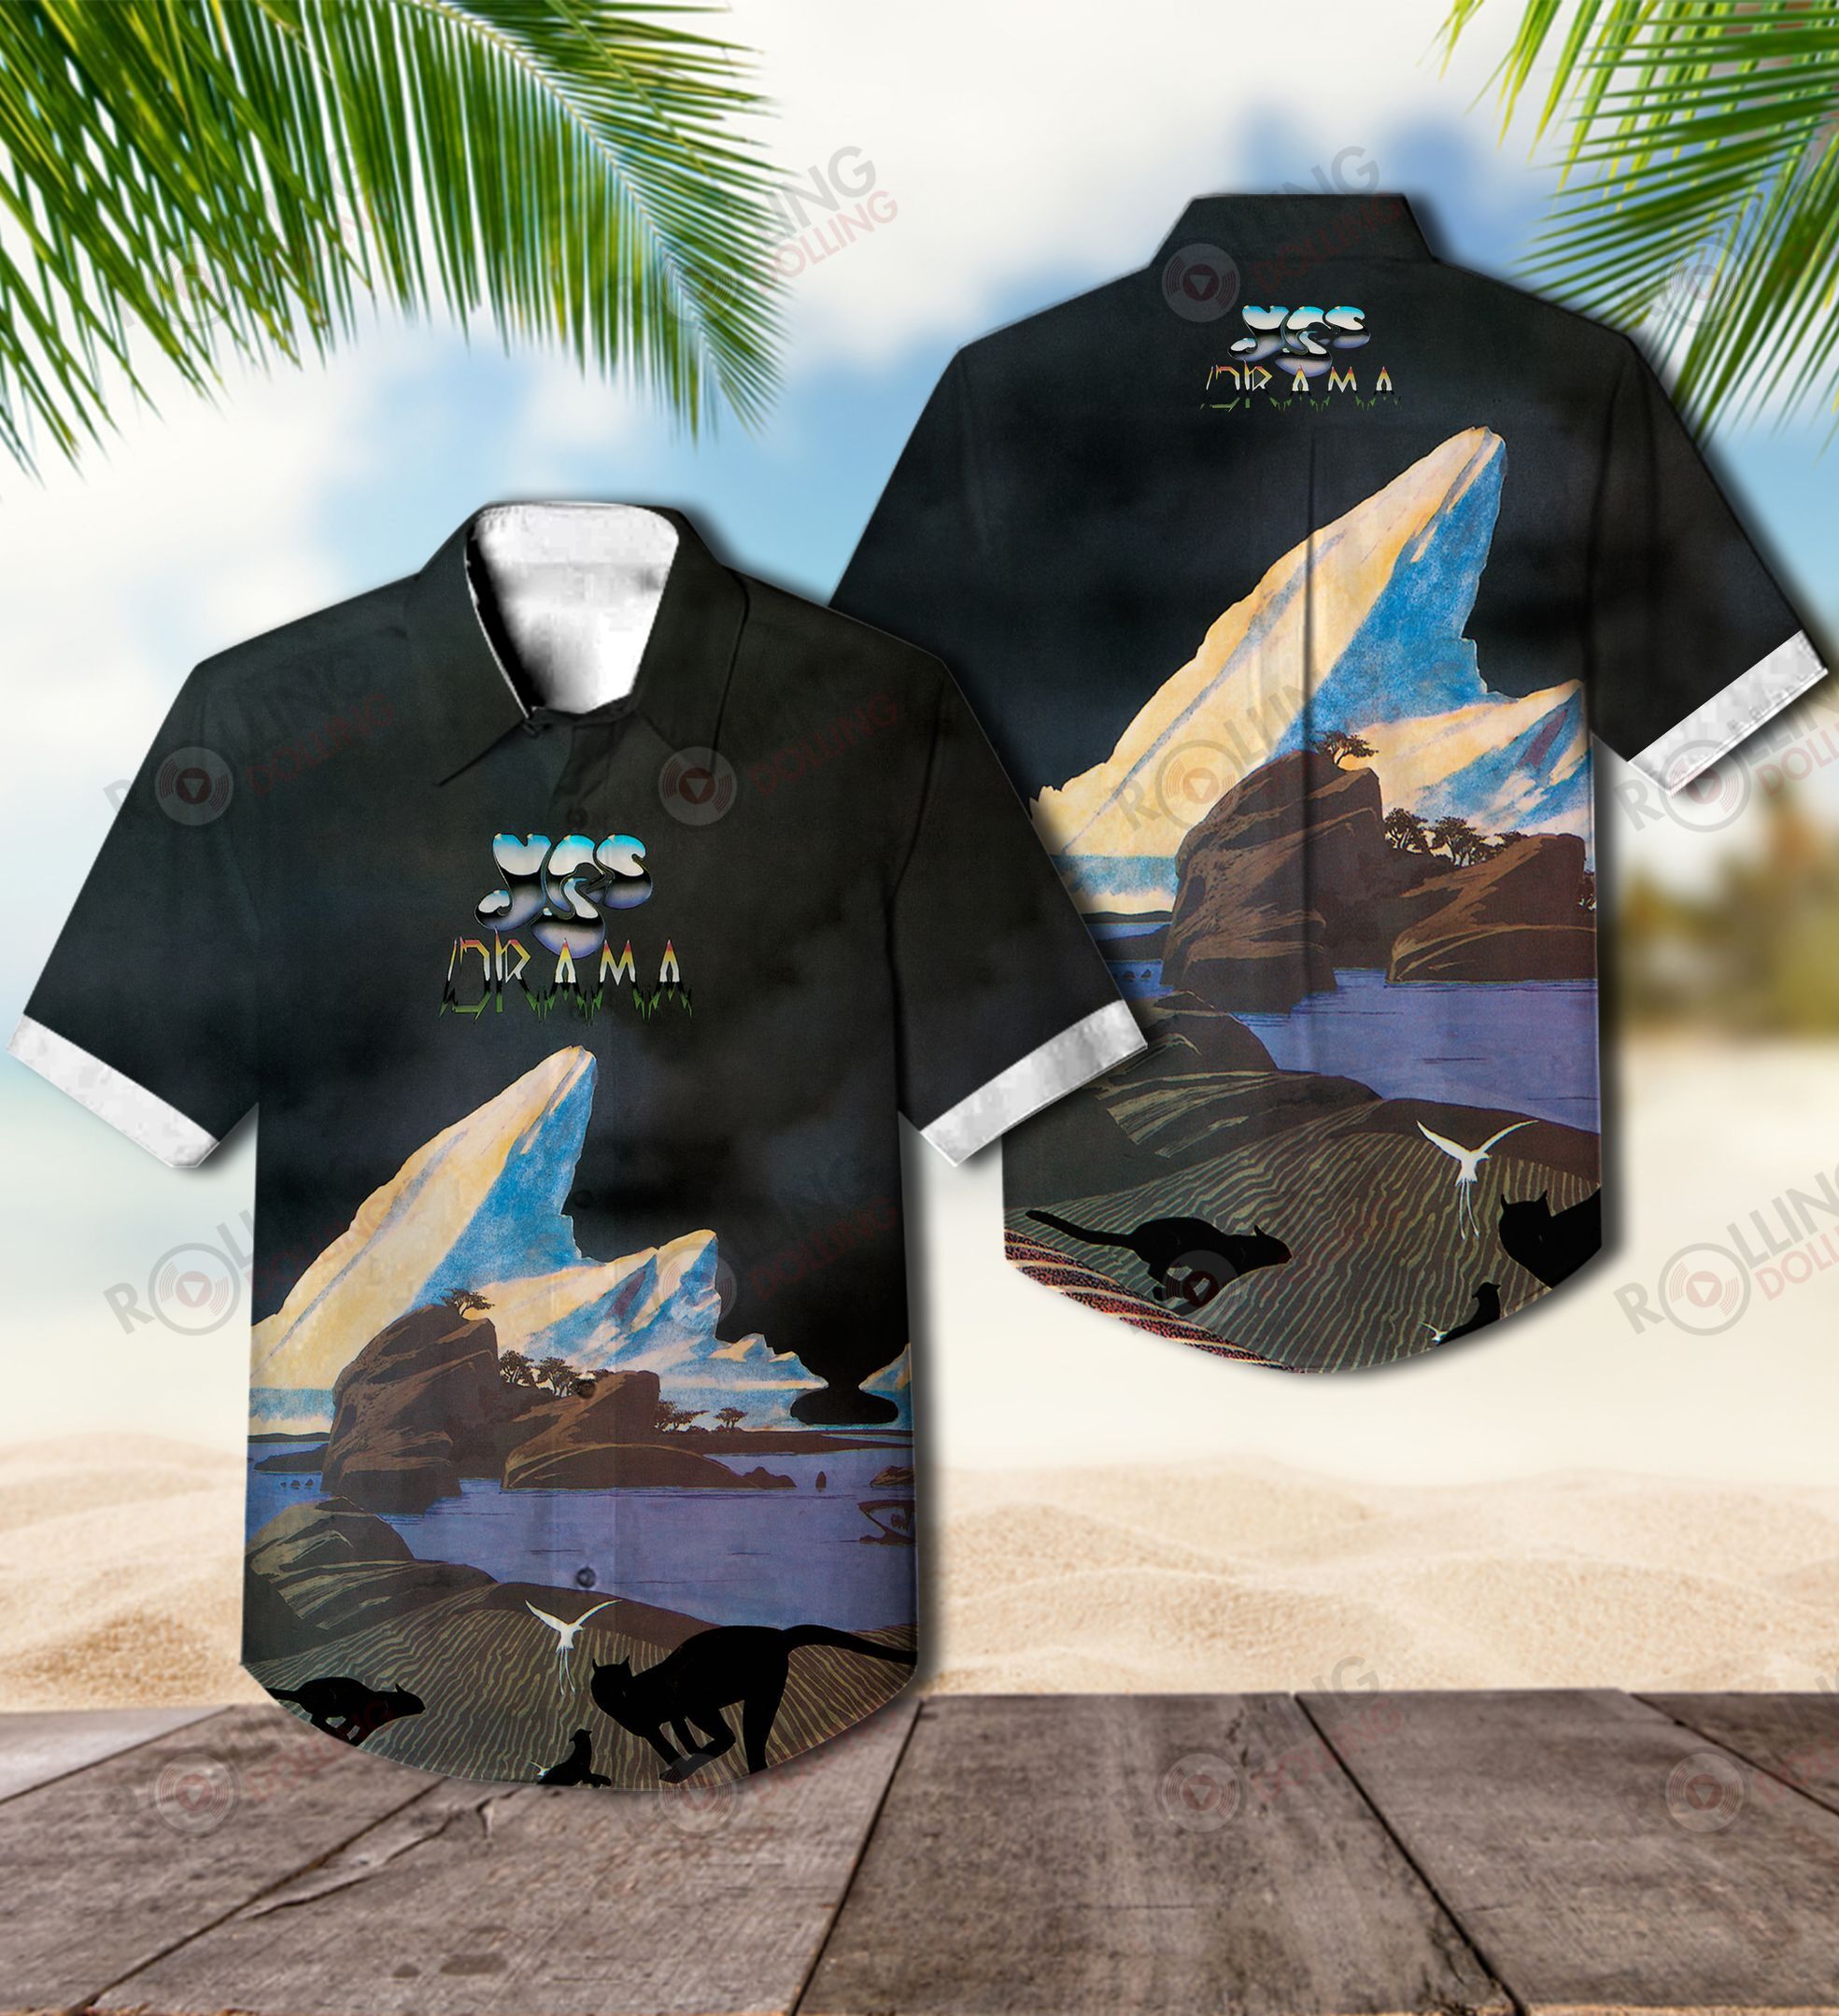 For summer, consider wearing This Amazing Hawaiian Shirt shirt in our store 177